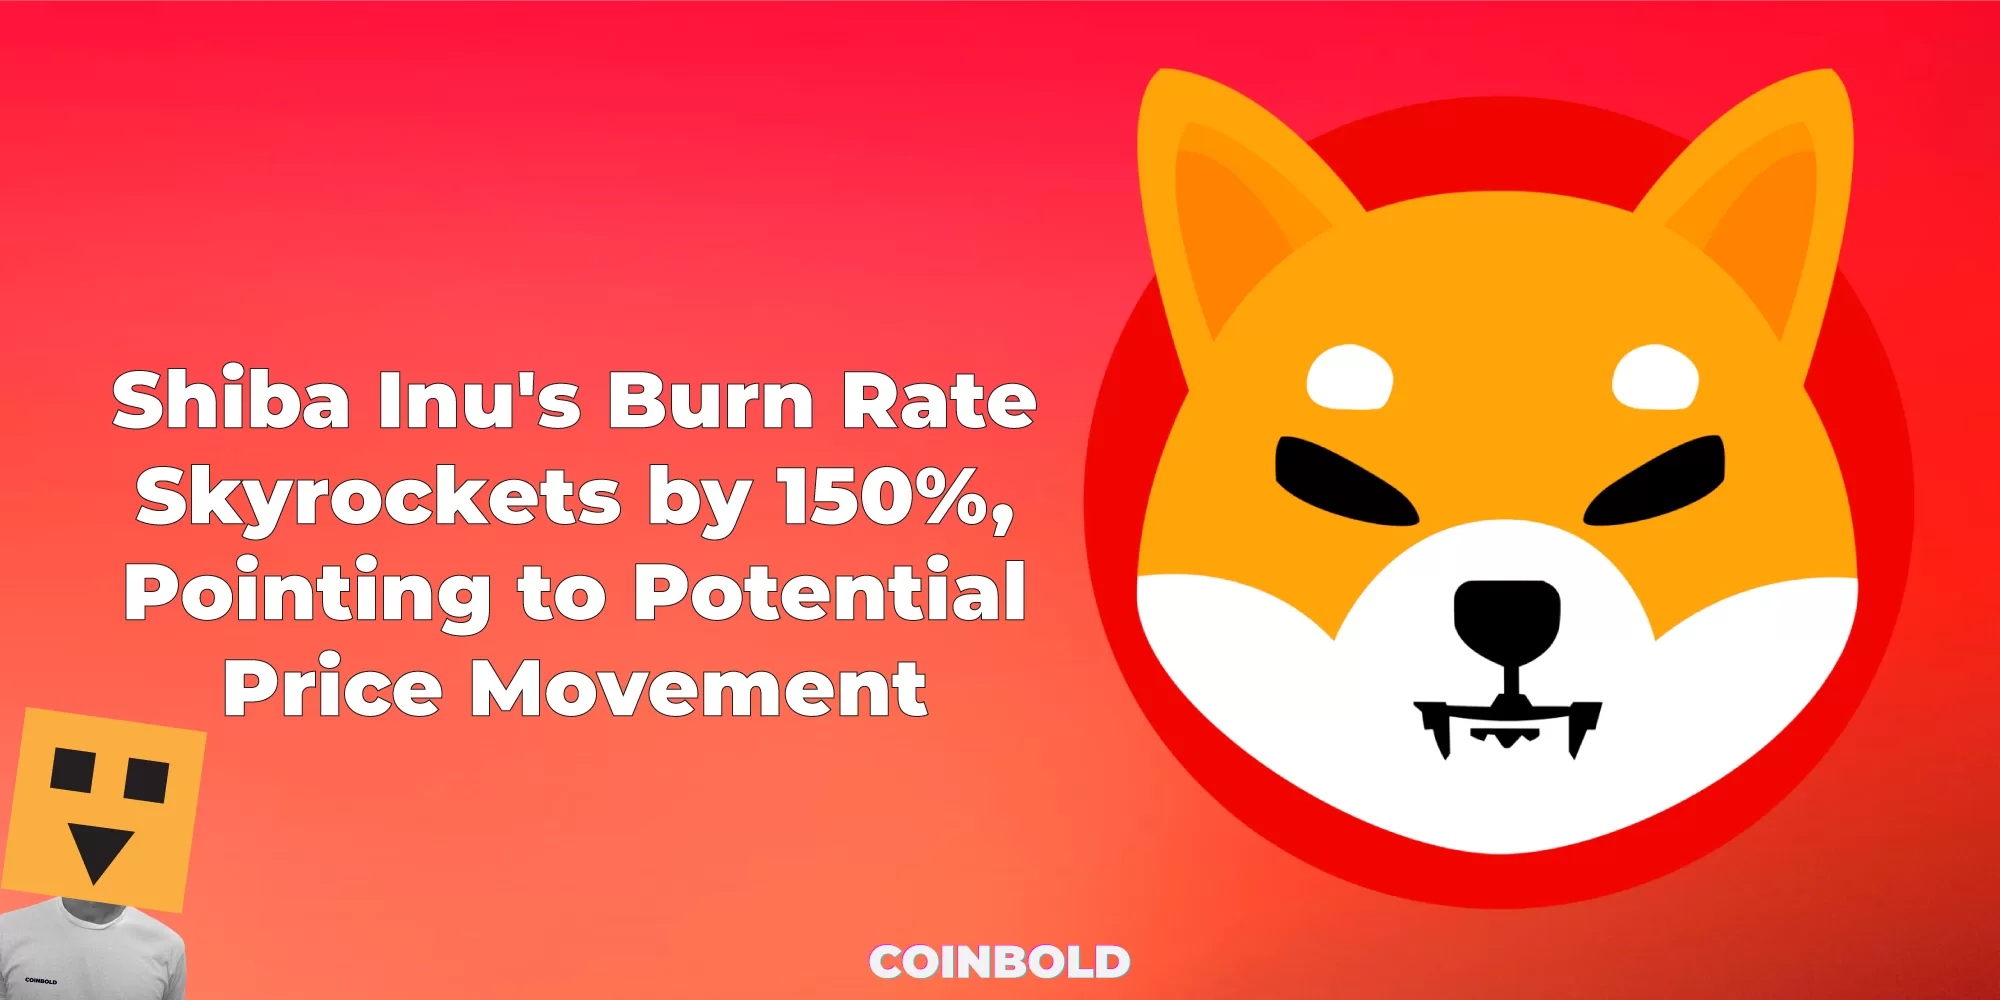 Shiba Inu's Burn Rate Skyrockets by 150%, Pointing to Potential Price Movement